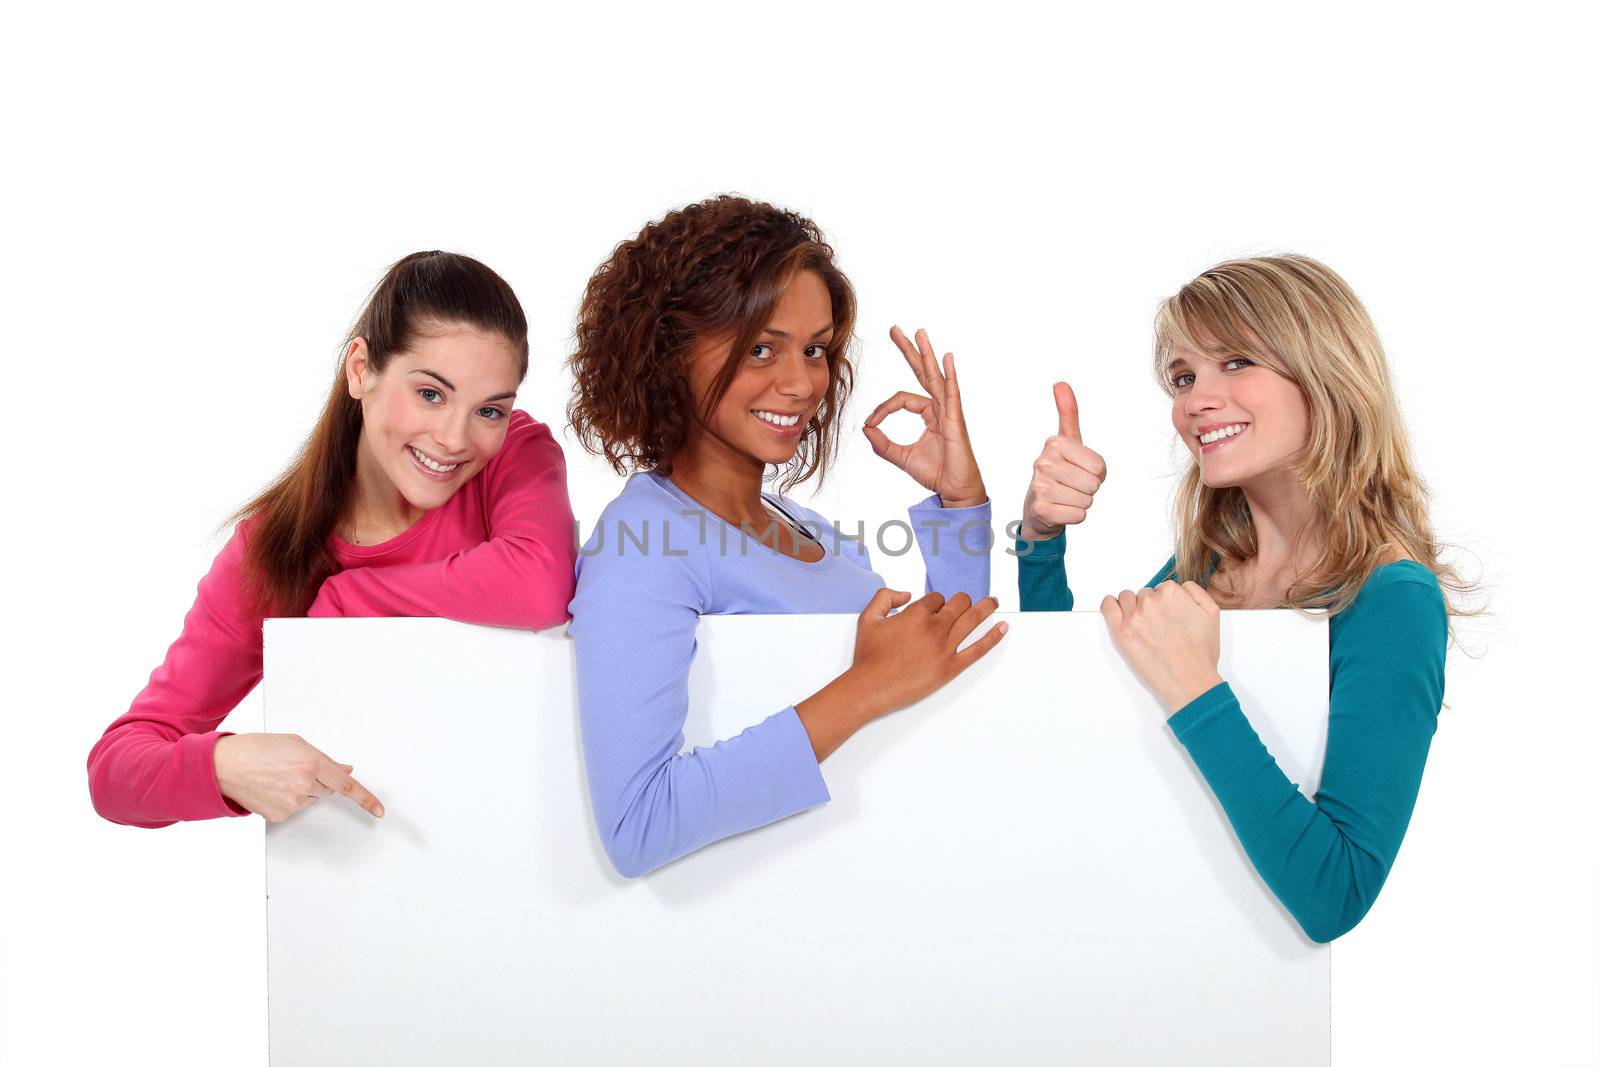 Women enthusiastically holding up a blank sign